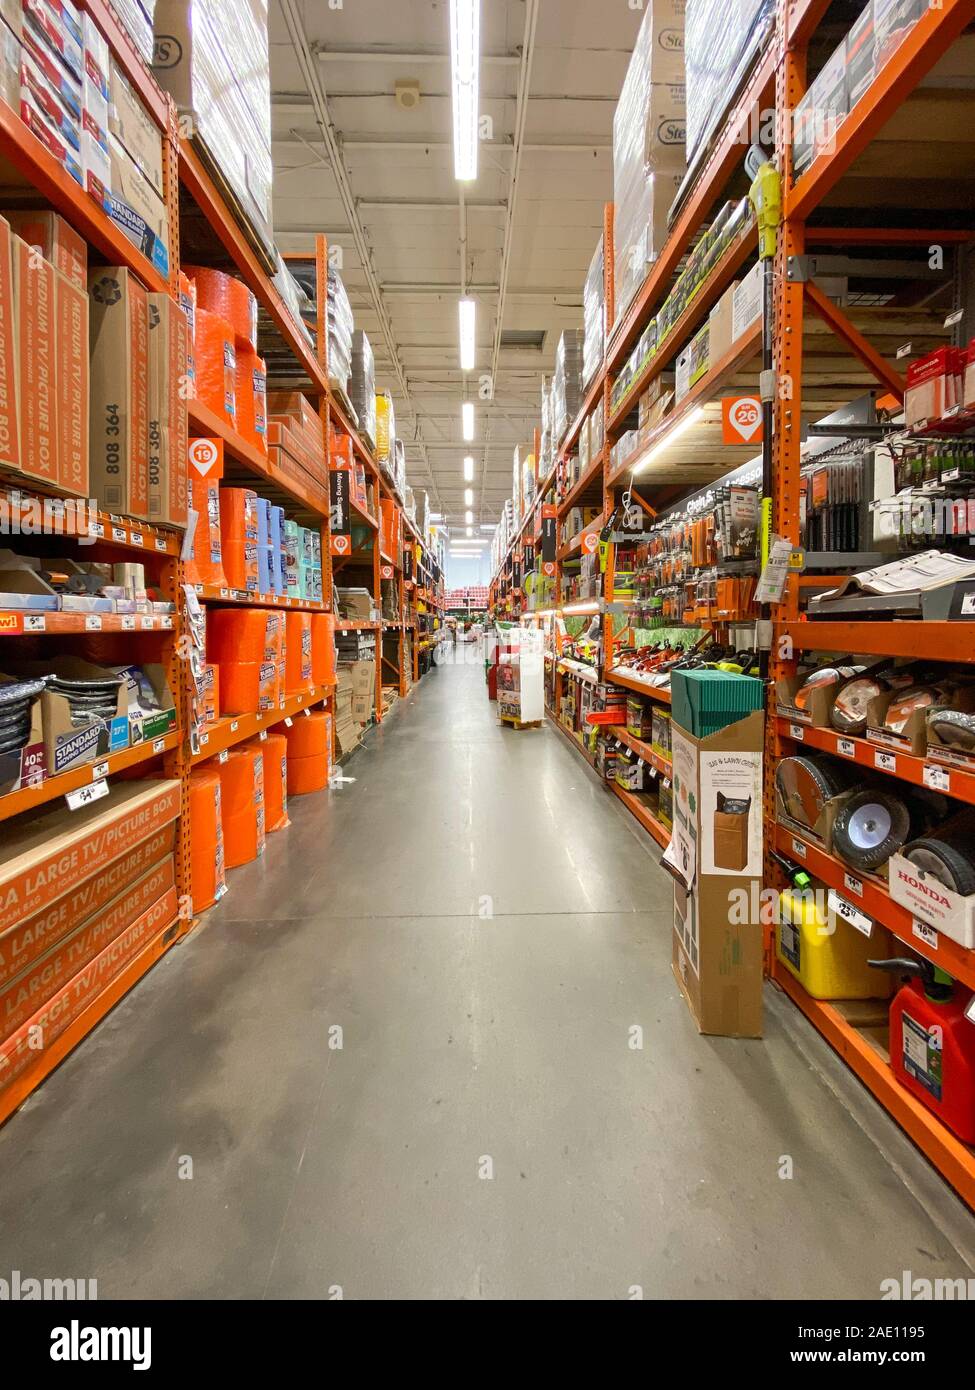 Aisle at The Home Depot hardware store. The Home Depot is the